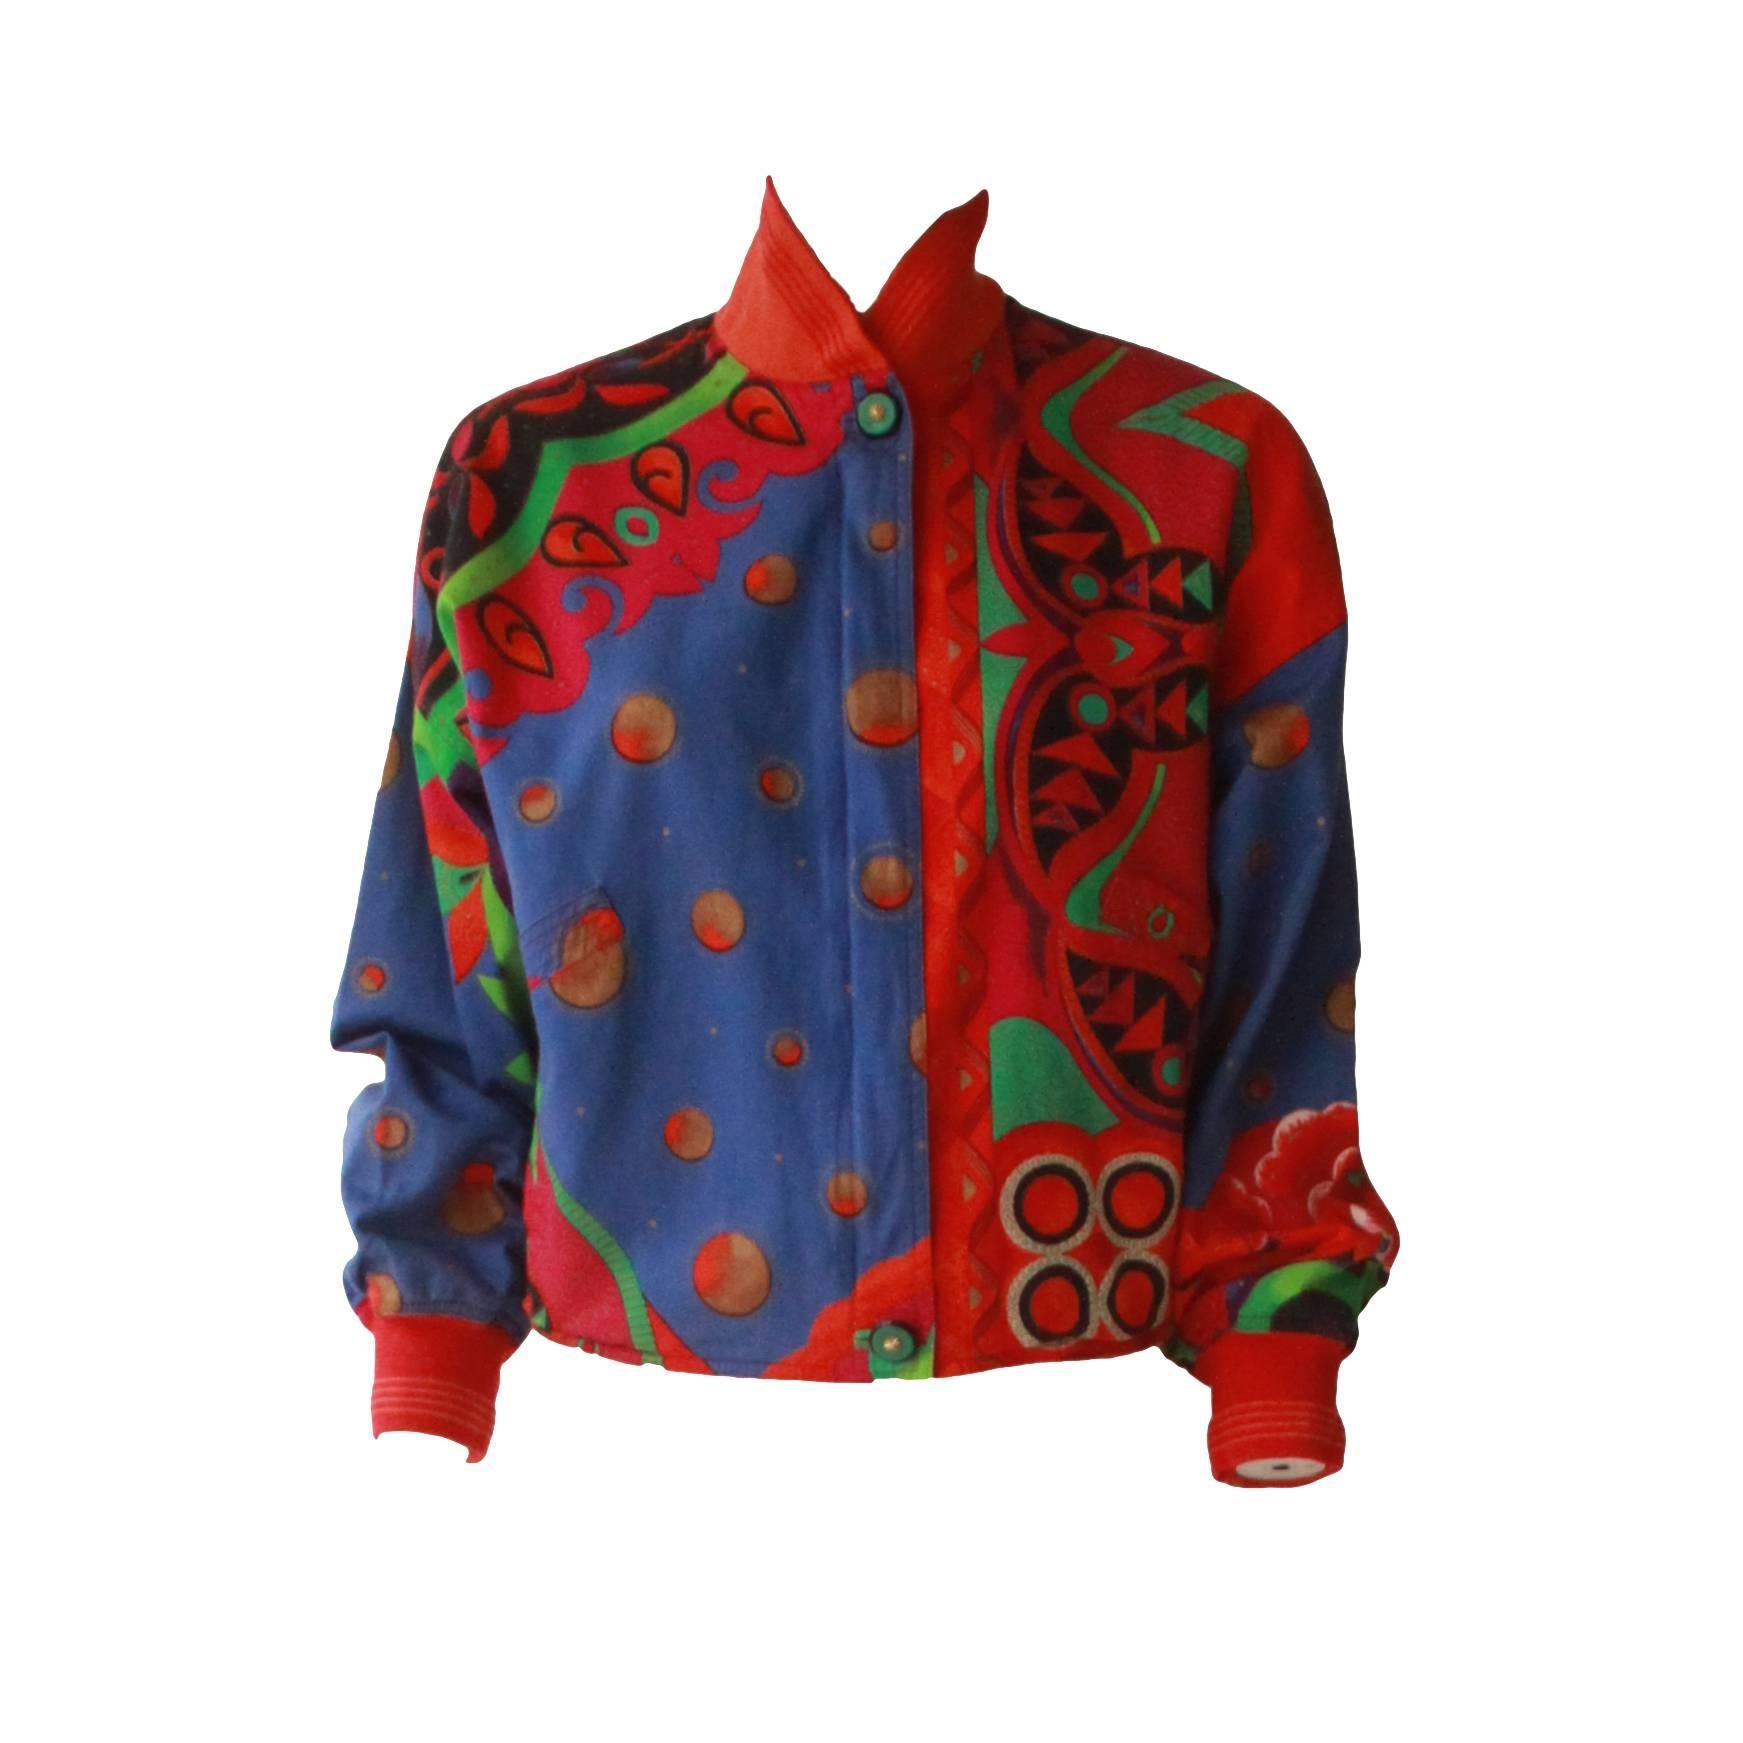 Gianni Versace Printed Bomber Jacket Spring 1991 For Sale